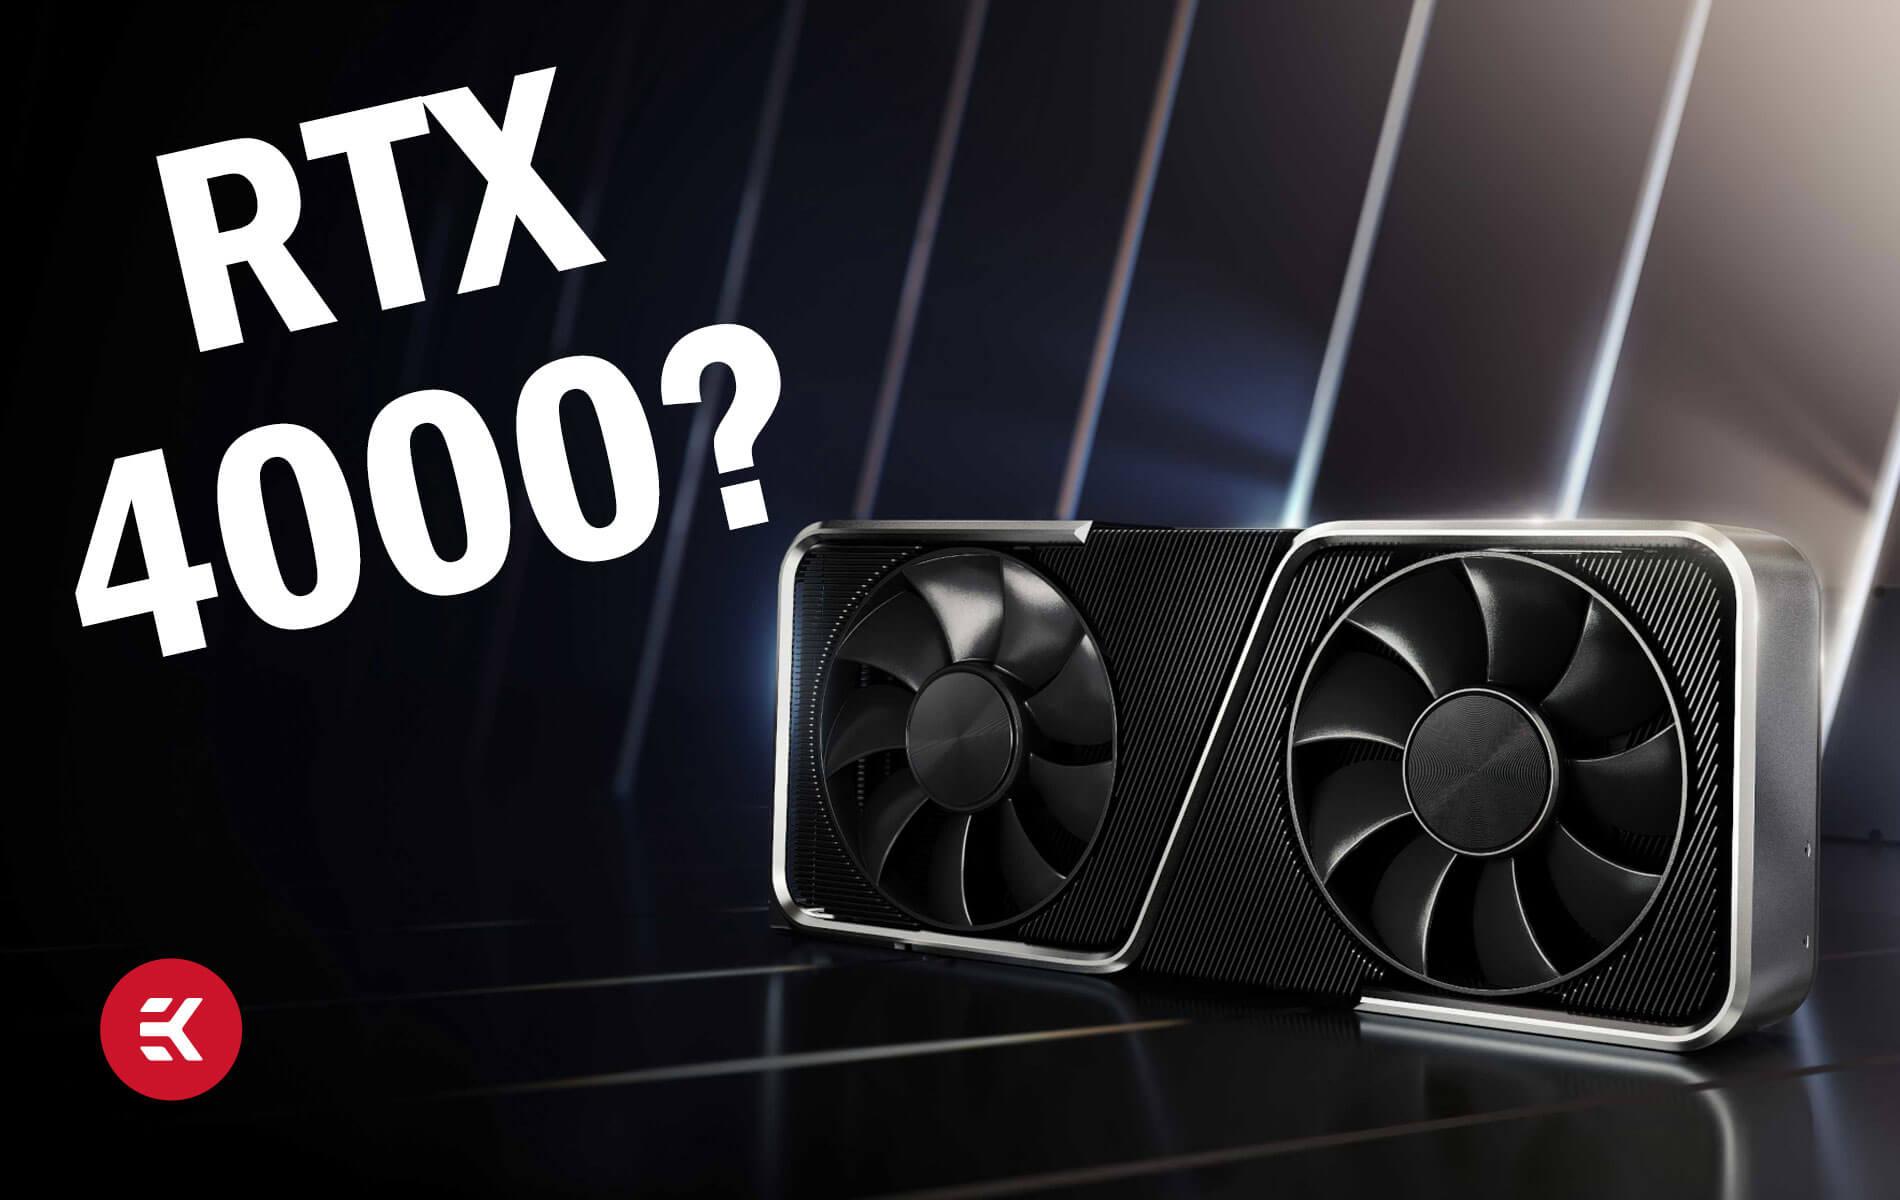 NVIDIA RTX 4000 GPU Rumors - Release Date, Price, Specs, and More